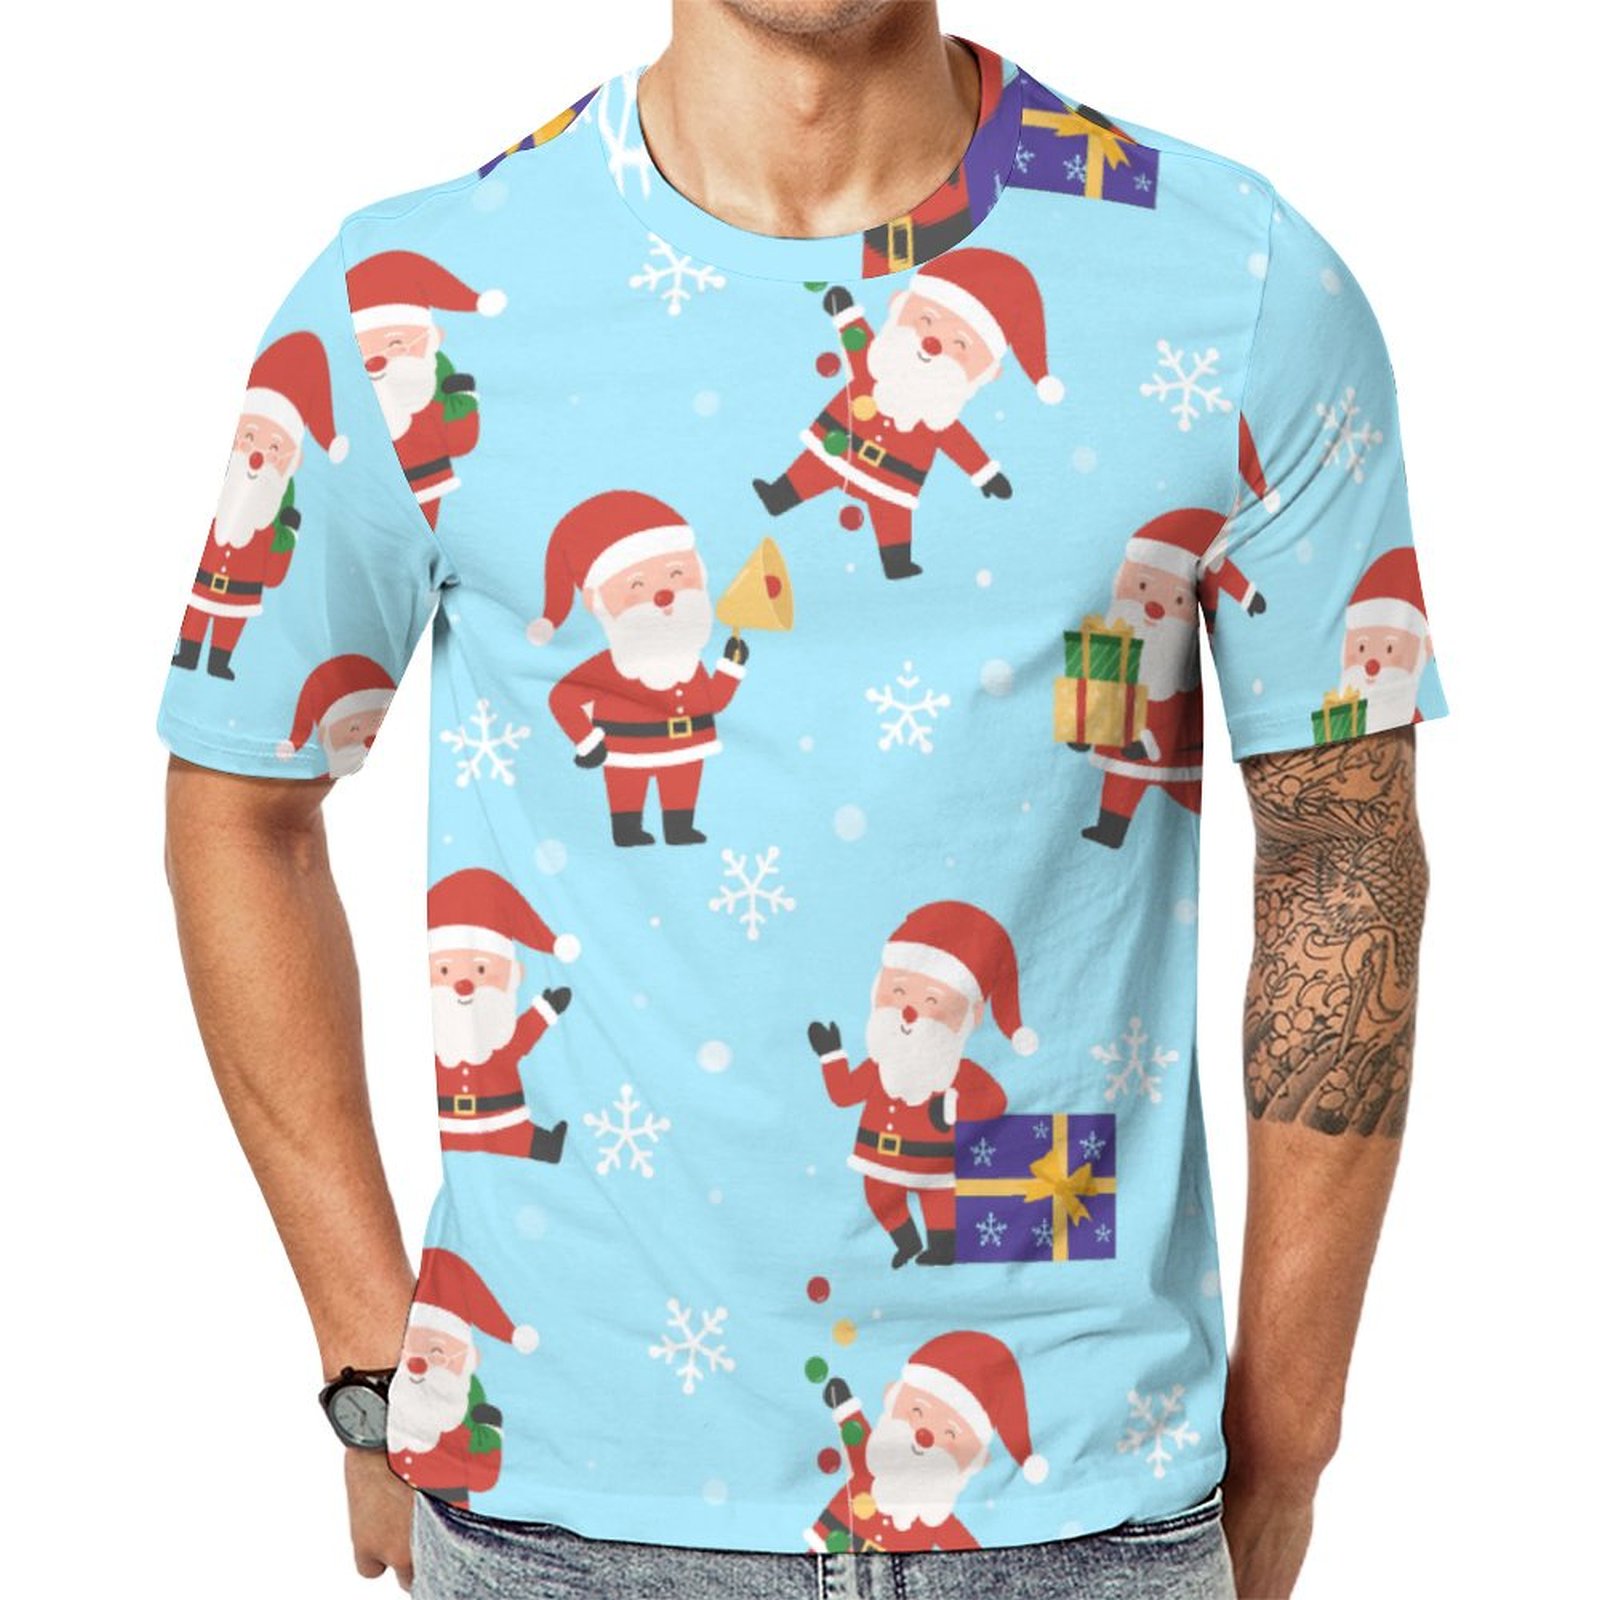 Father Christmas Santa Claus Short Sleeve Print Unisex Tshirt Summer Casual Tees for Men and Women Coolcoshirts